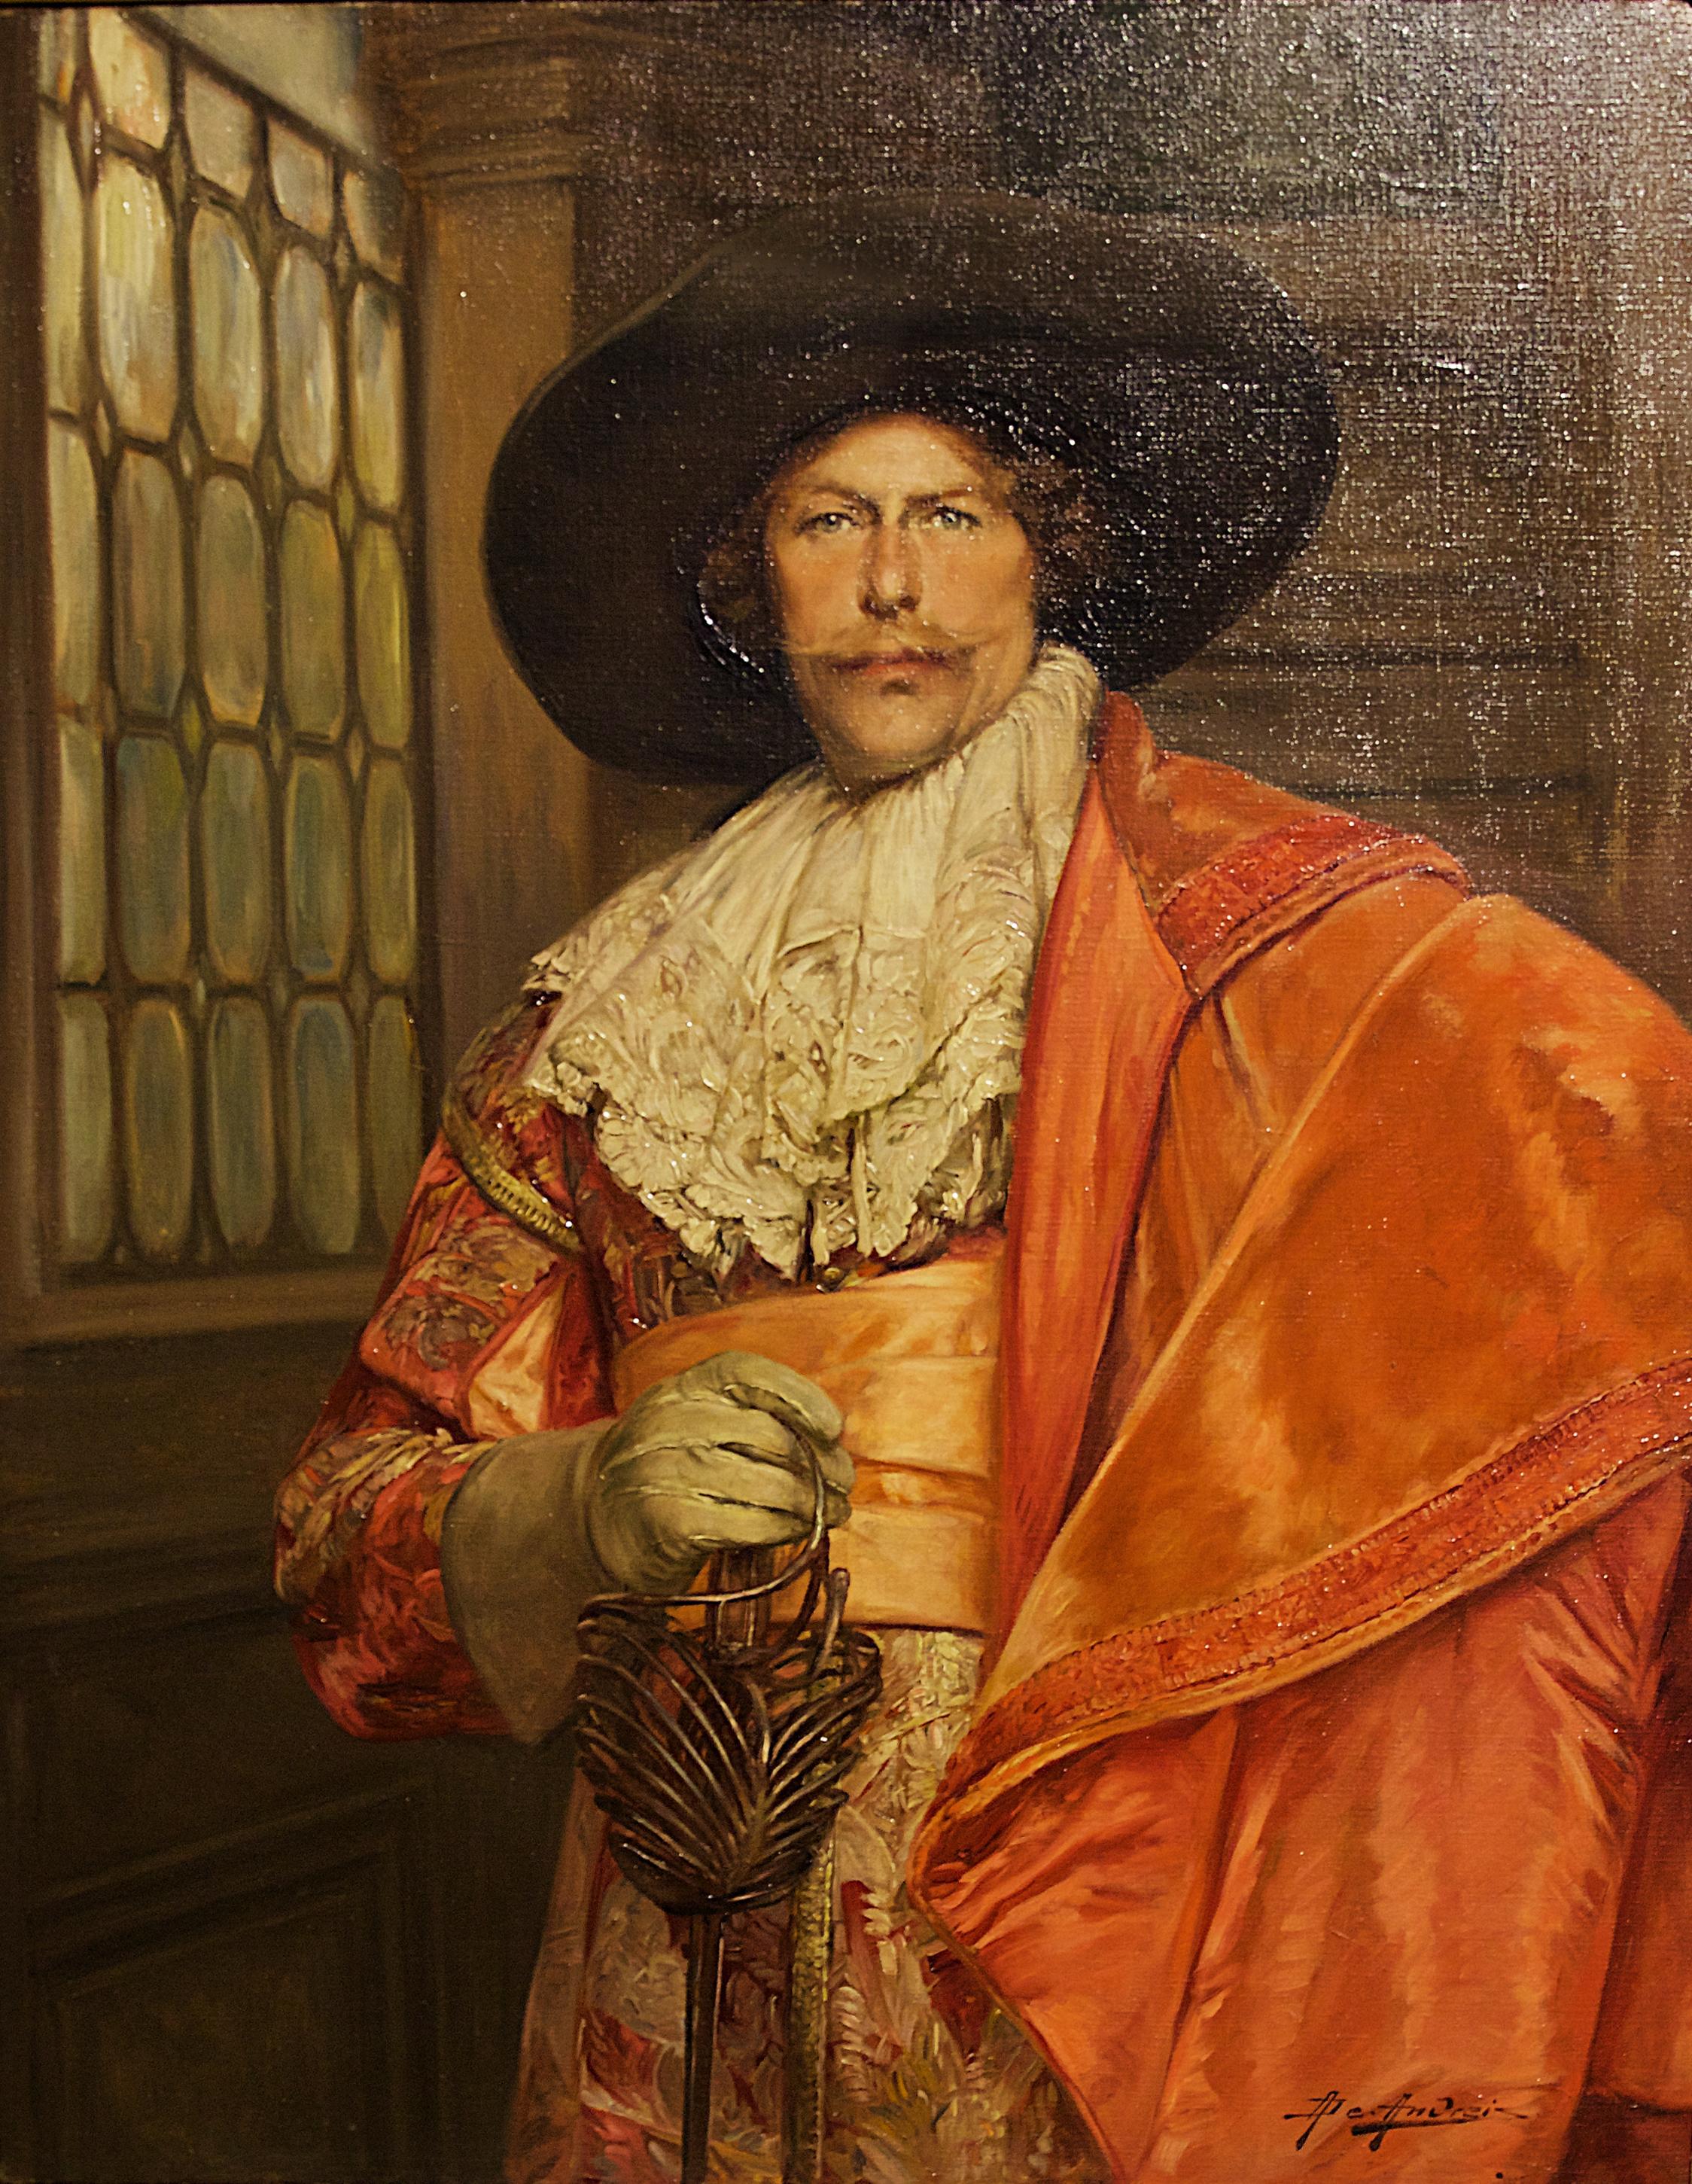 Alex de Andreis was a French painter of the late 19th and early 20th centuries. 

Andreis’ subjects were mostly genre pieces set in 17th and 18th century costumes similar to those of Stephen Lewin. His broad confident technique, which captures